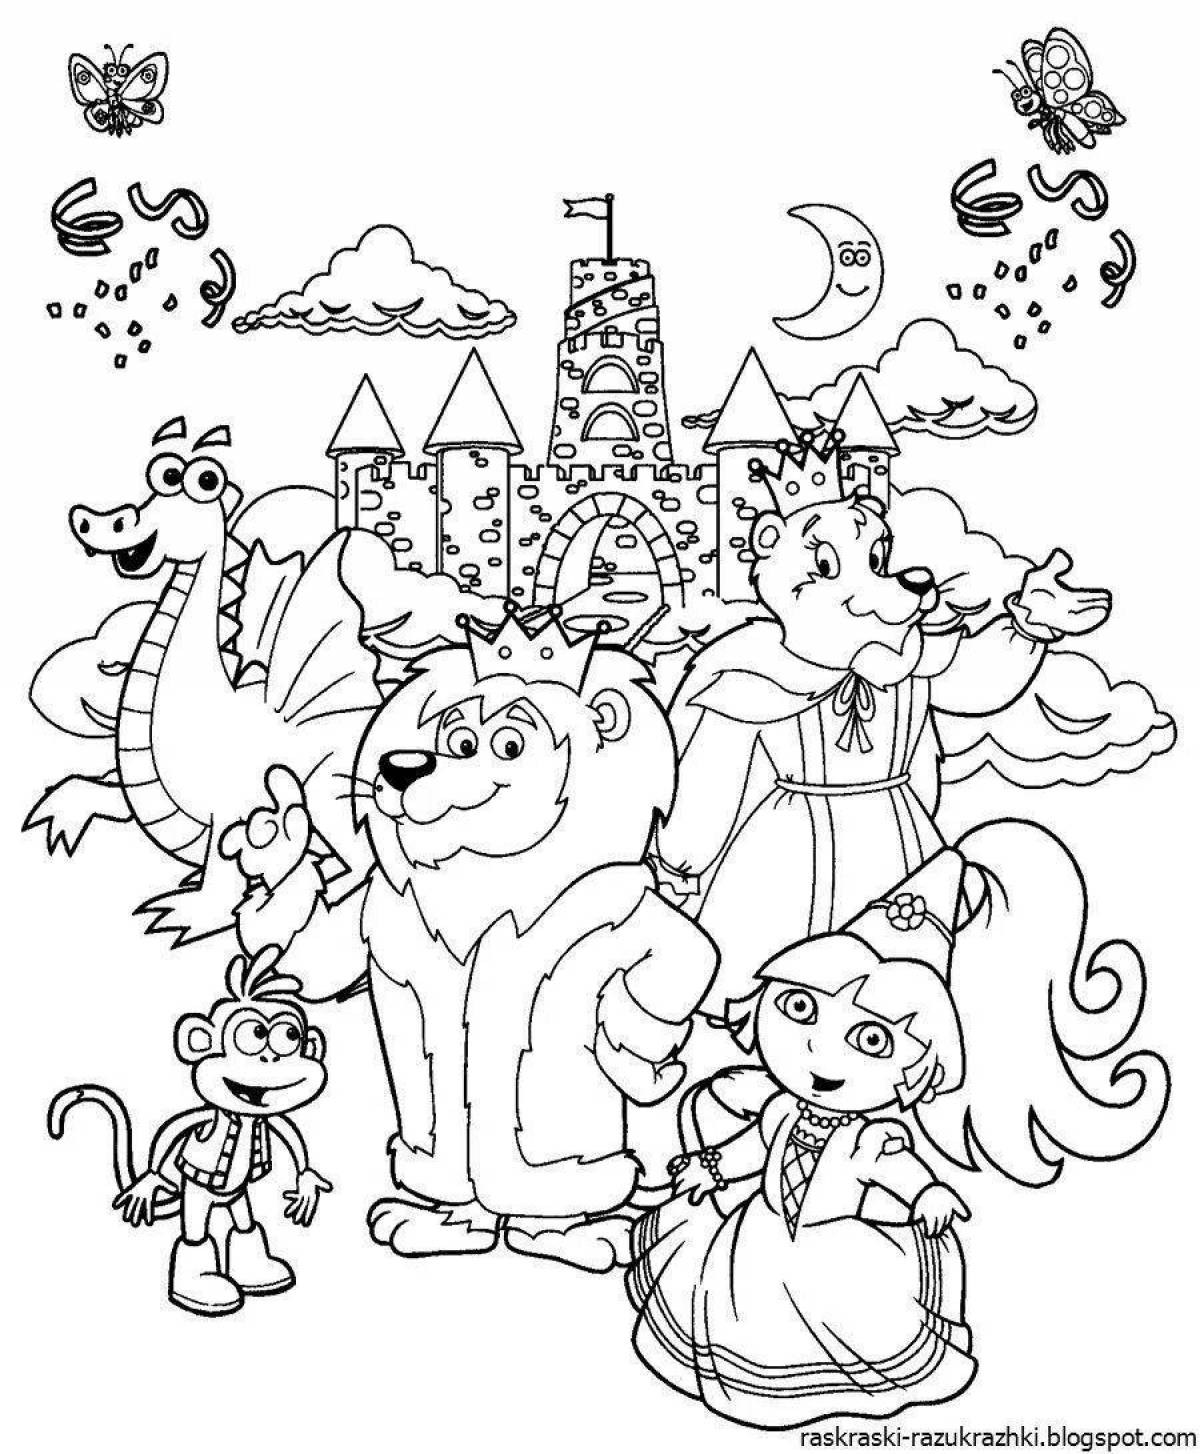 A fun coloring book popular with kids